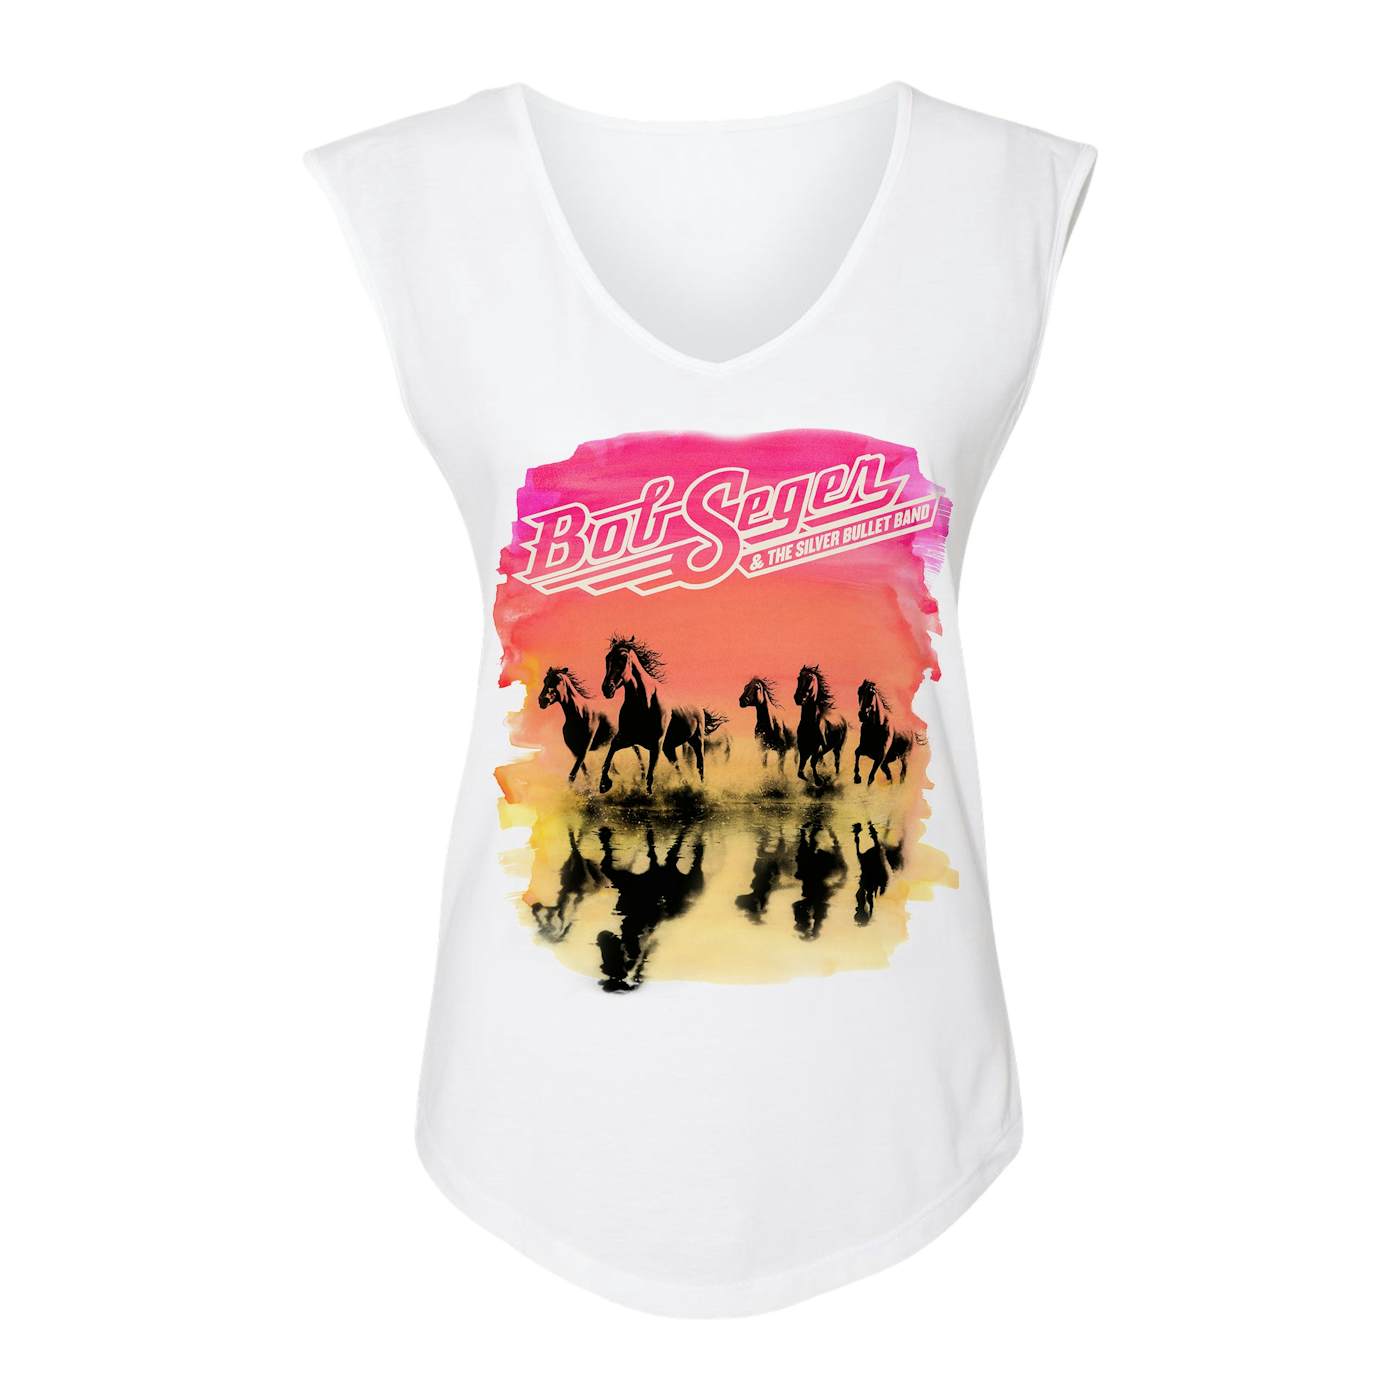 Bob Seger & The Silver Bullet Band Against The Wind Sunset Ladies Sleeveless Tee